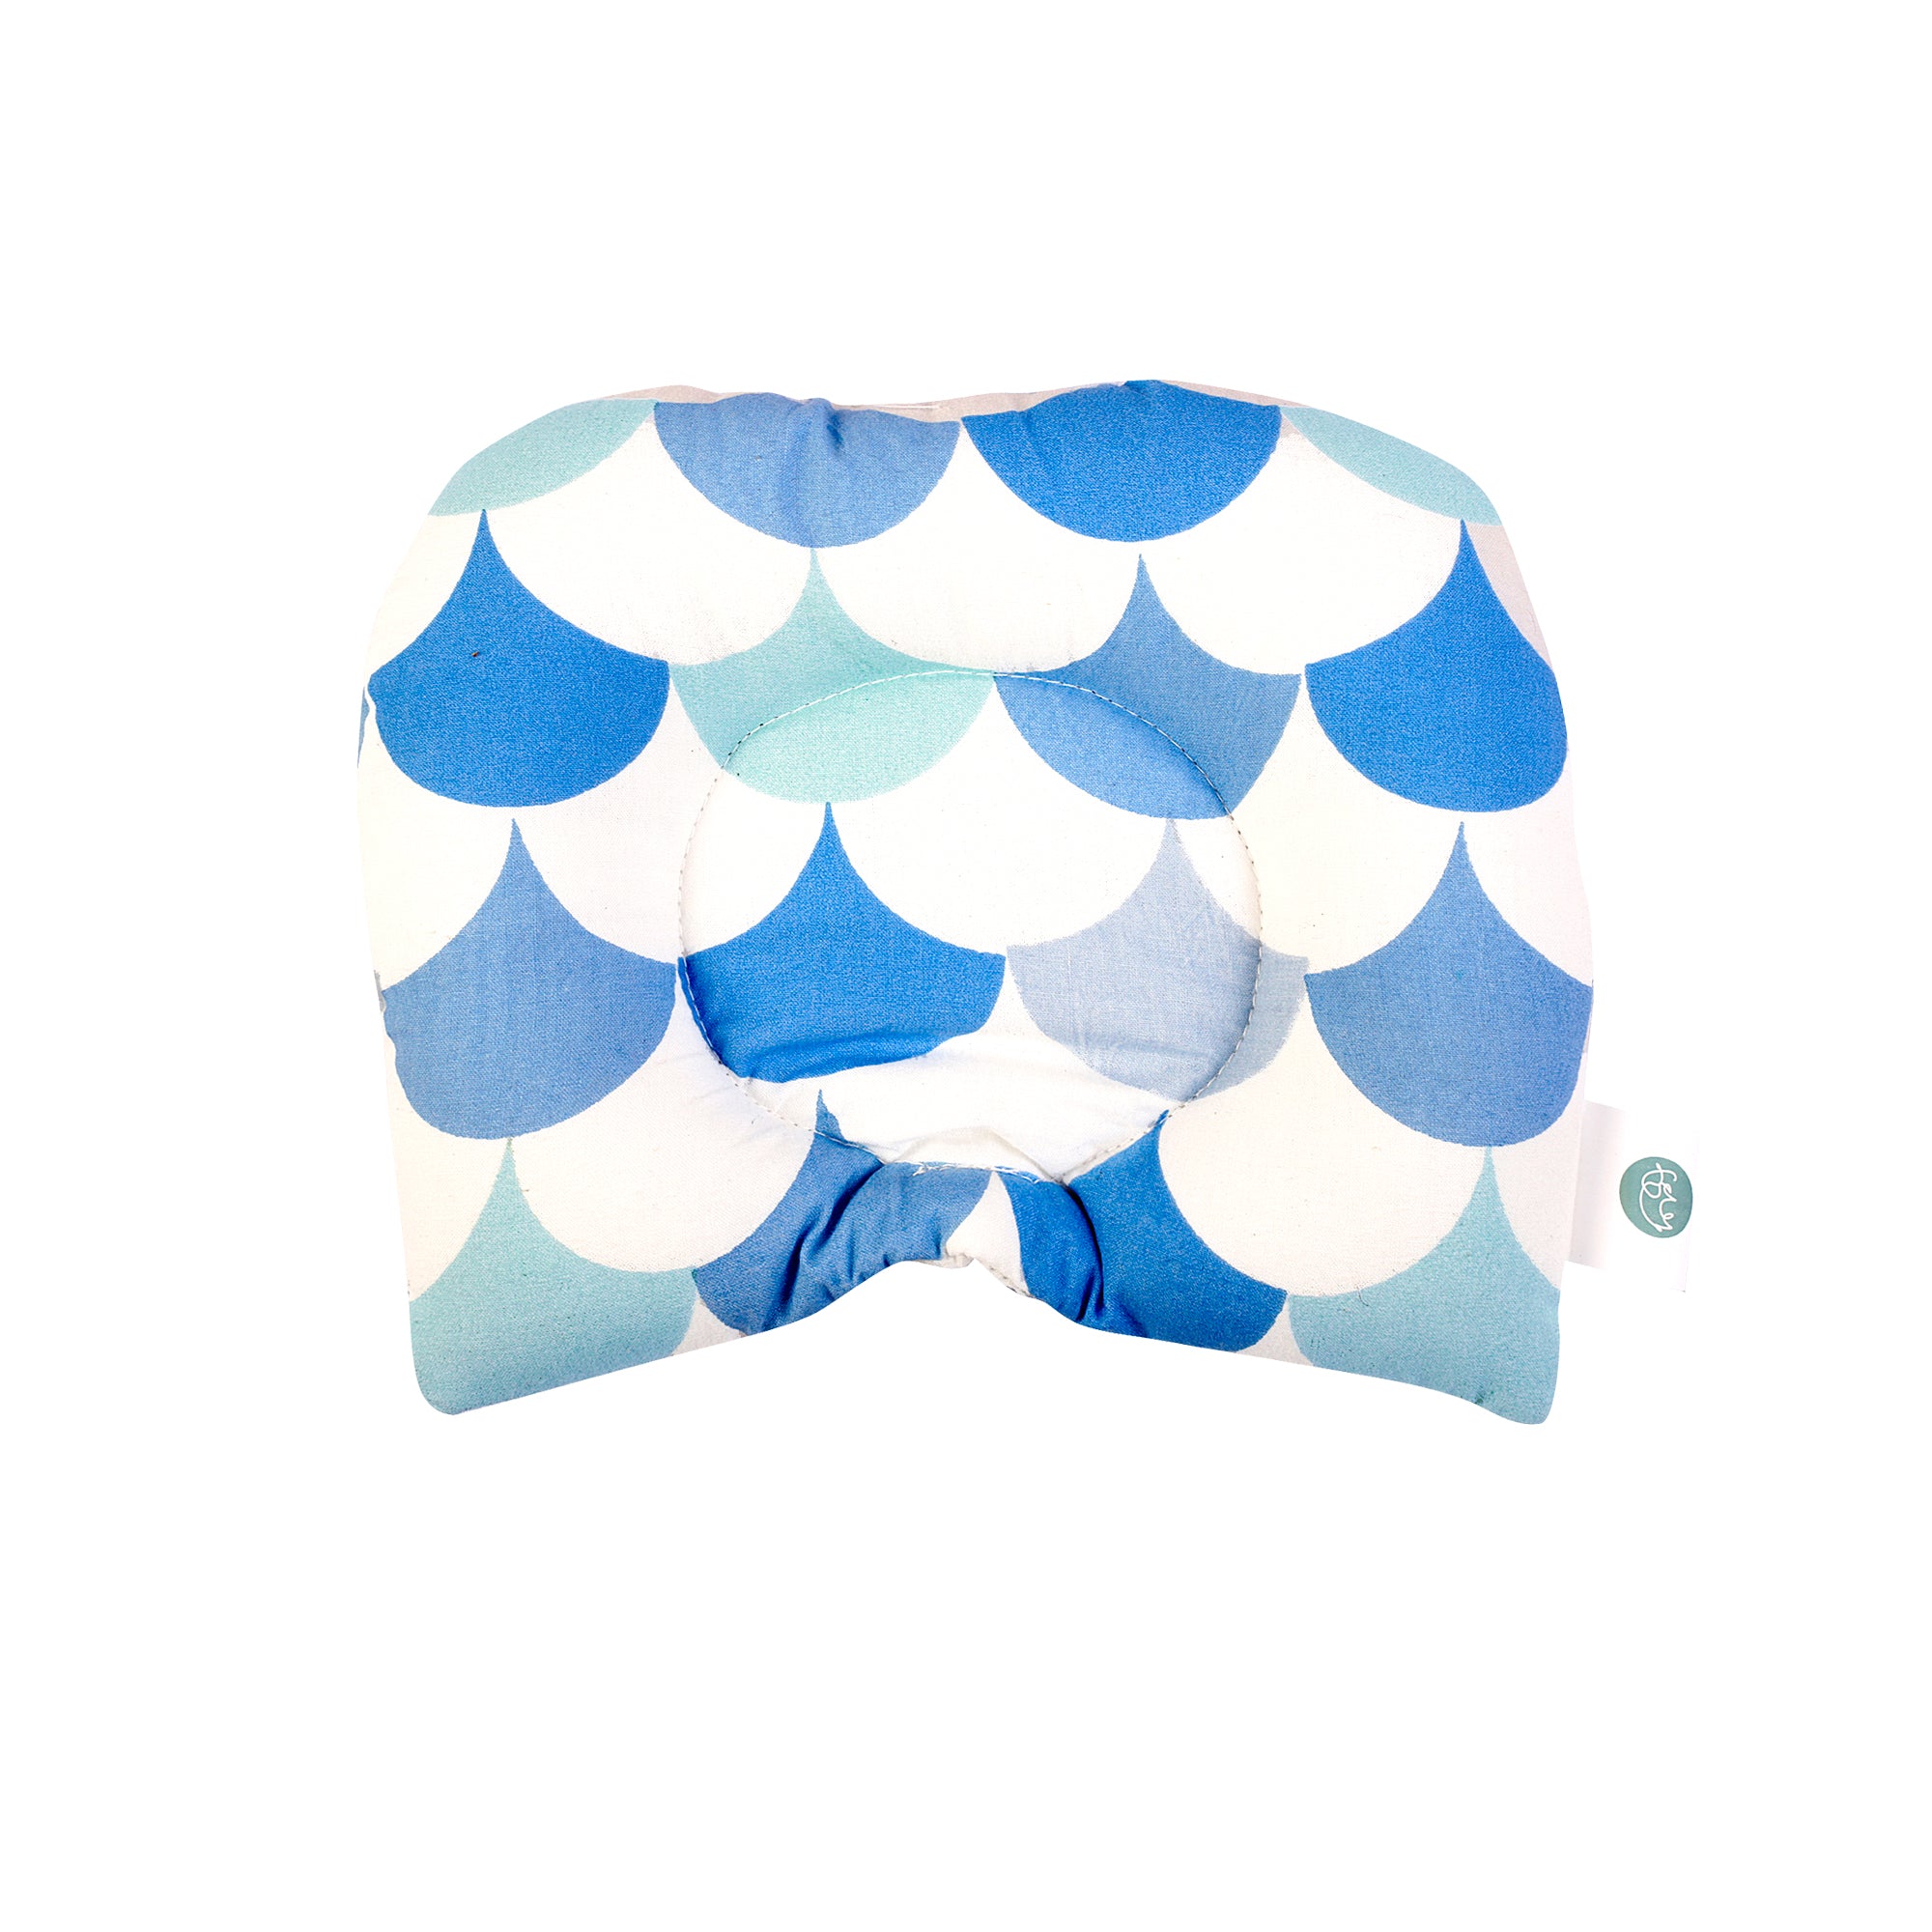 ICY BLUE SCALLOP NESTO PAD U-SHAPED PILLOW - CLEARANCE